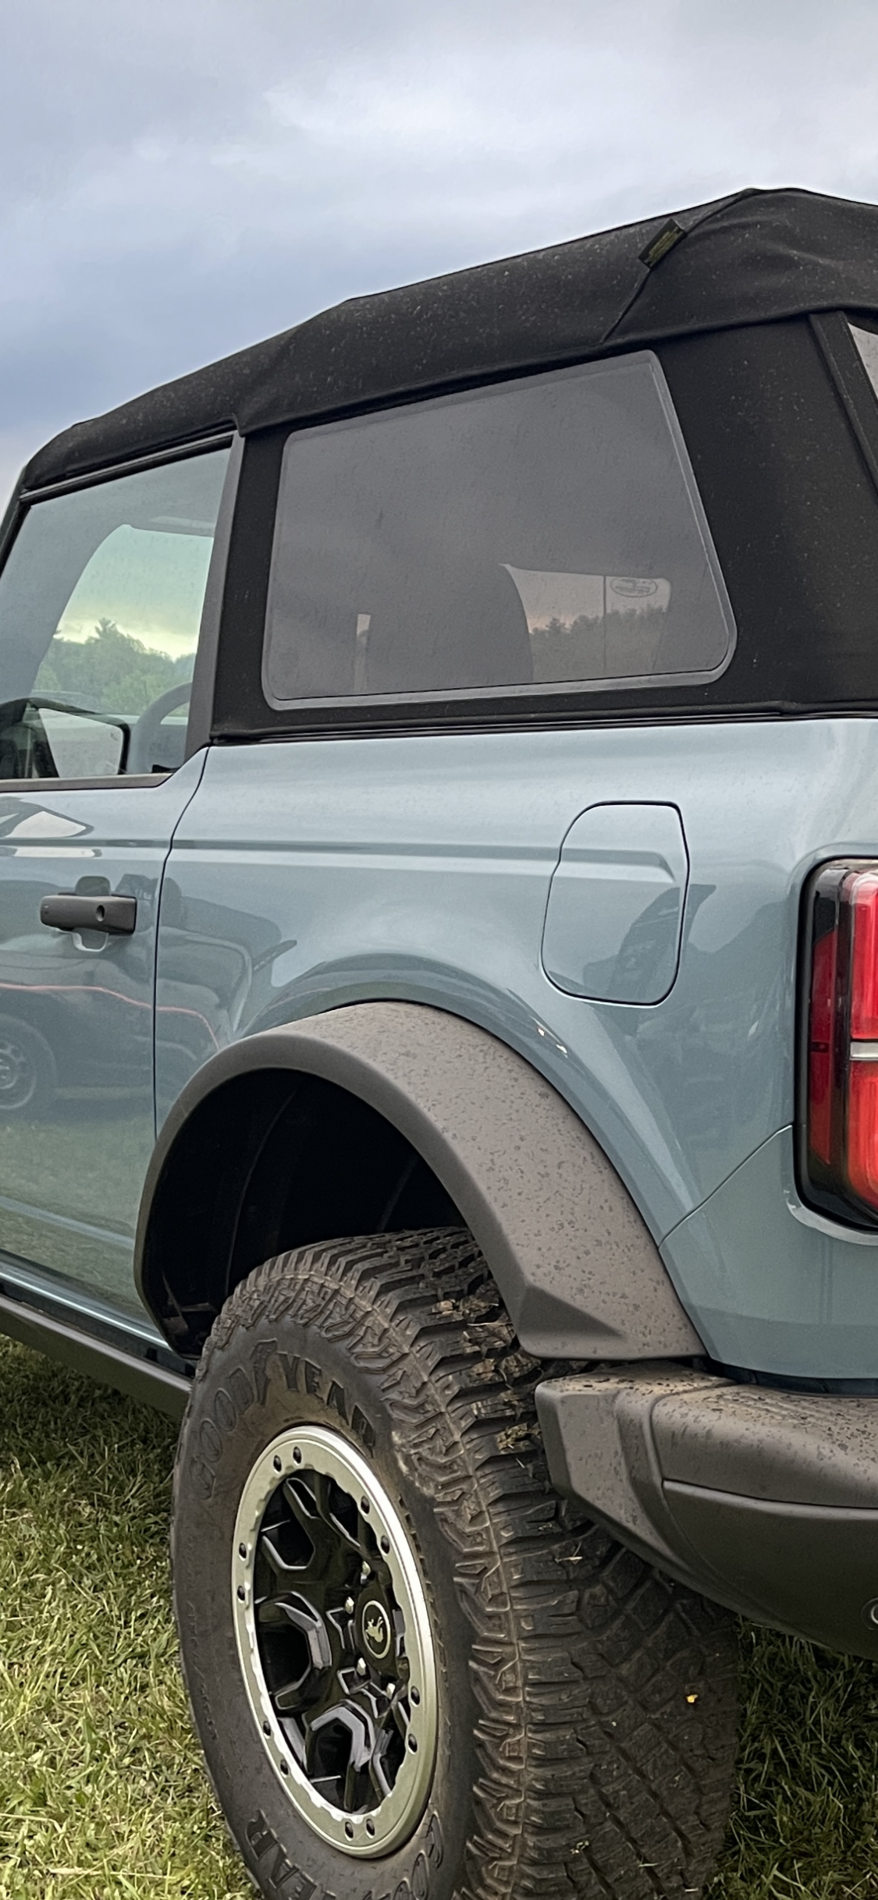 Ford Bronco How long until someone figures out a fix / tweak / mod to pull the rear soft top window tight? 4E1569CA-DAA4-43DF-AF99-2AB15A6FAAD4